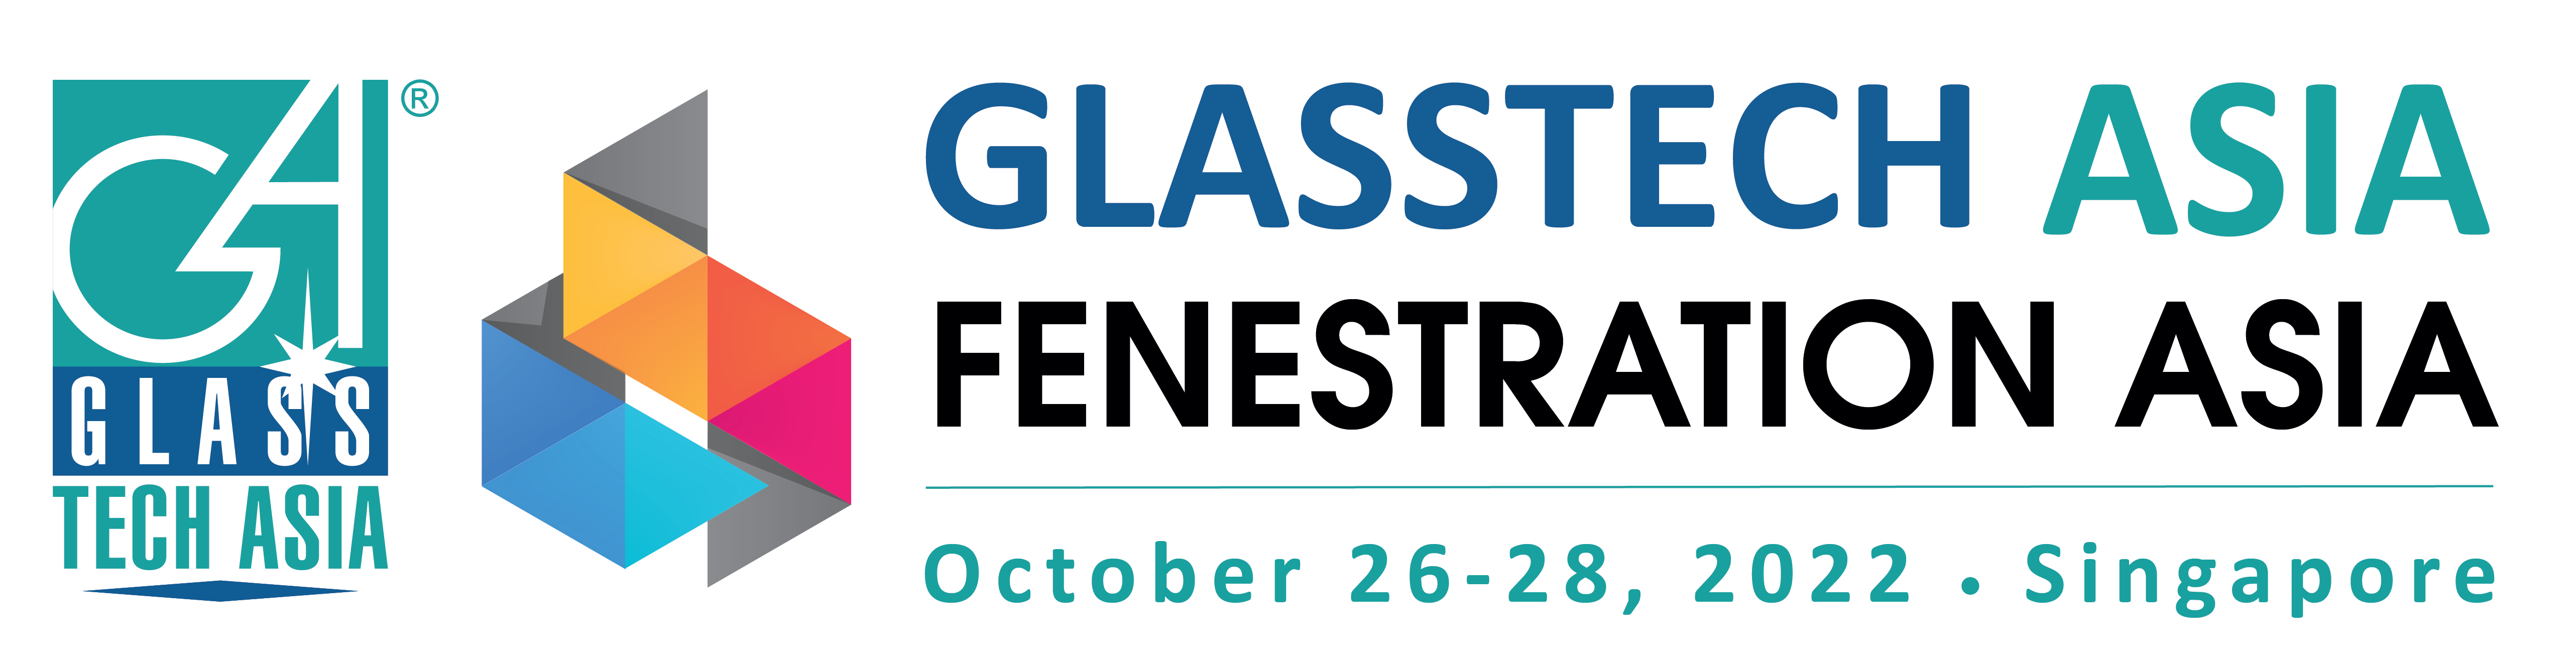 Glasstech and Fenestration Asia 2022, Singapore, South East, Singapore